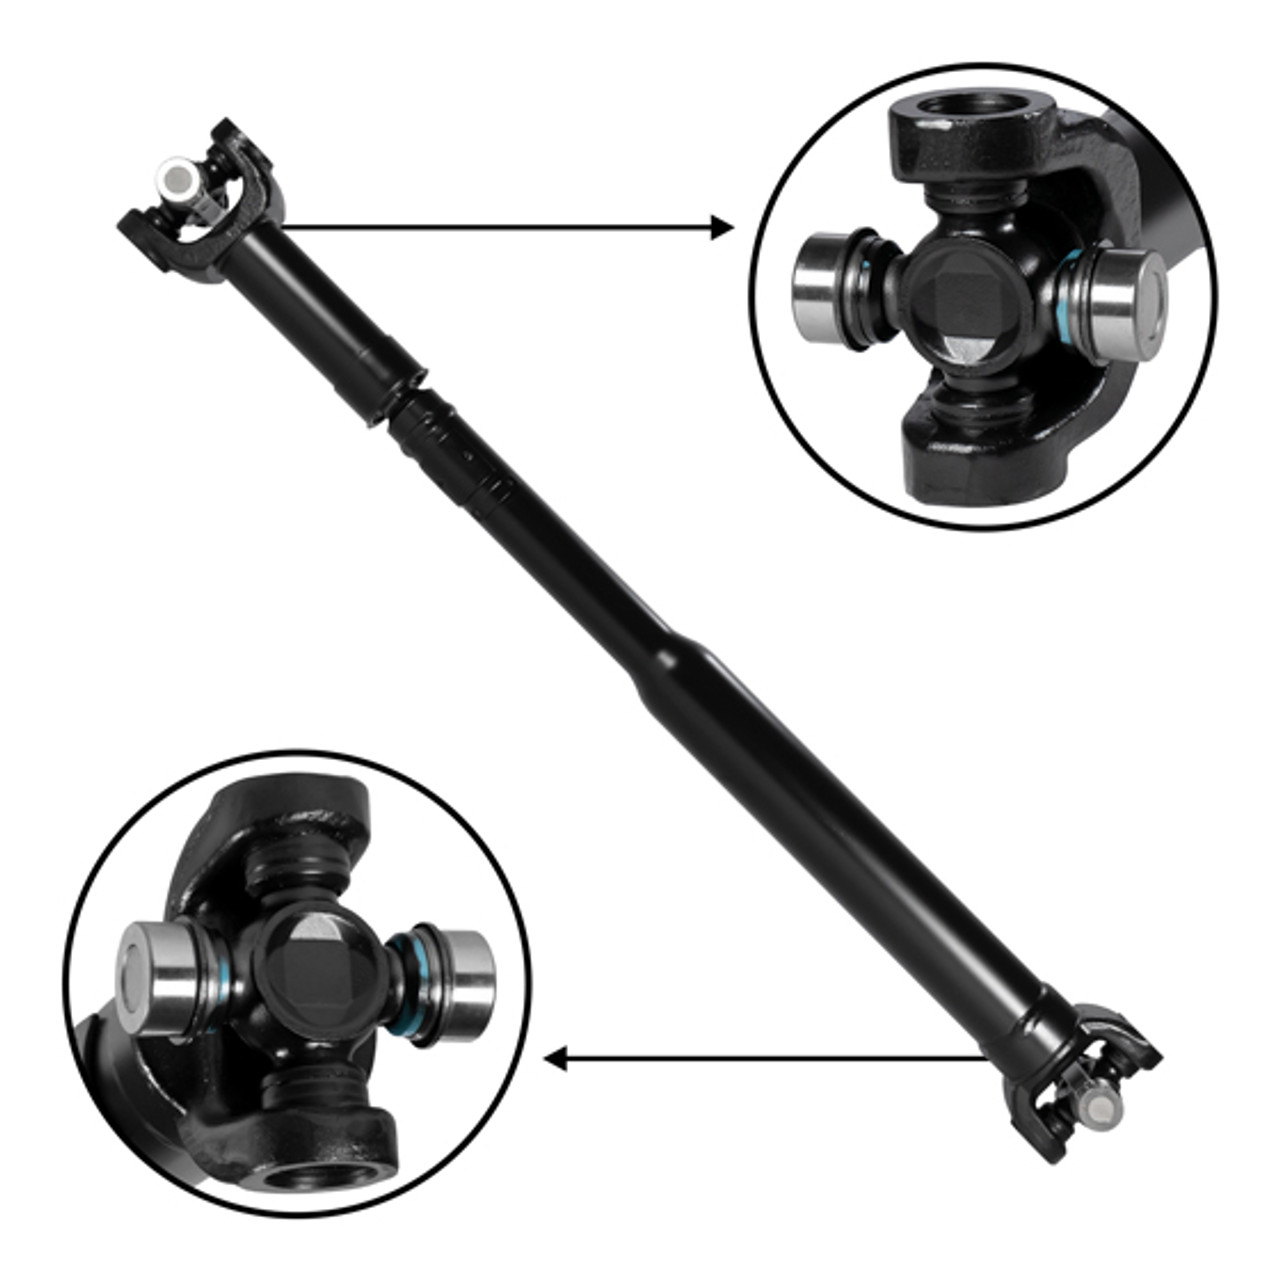 NEW USA Standard Front Driveshaft for Cadillac Escalade, GM Truck & SUV, 31-1/2" Center to Center